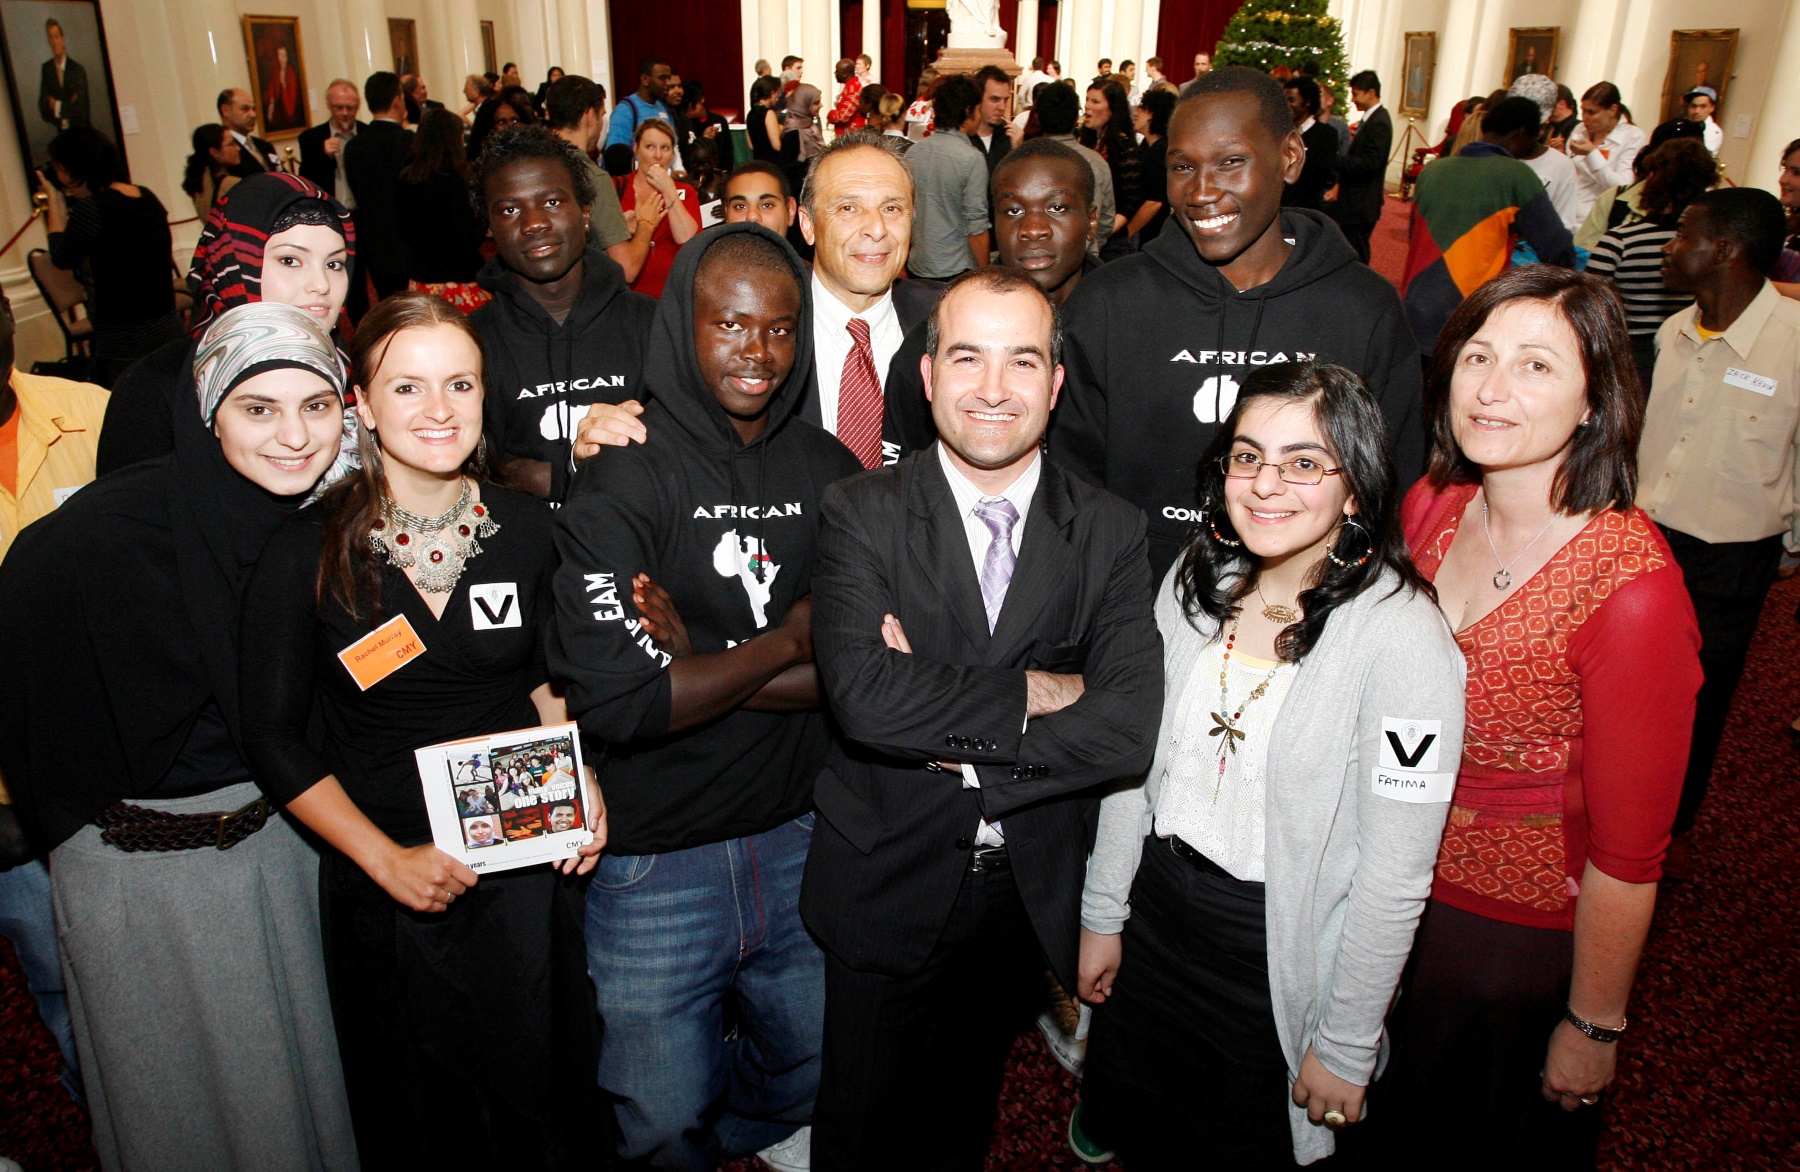 Carmel Guerra, Minister James Merlino, Hass Dellal and young people at the launch of the CMY 20th Anniversary event